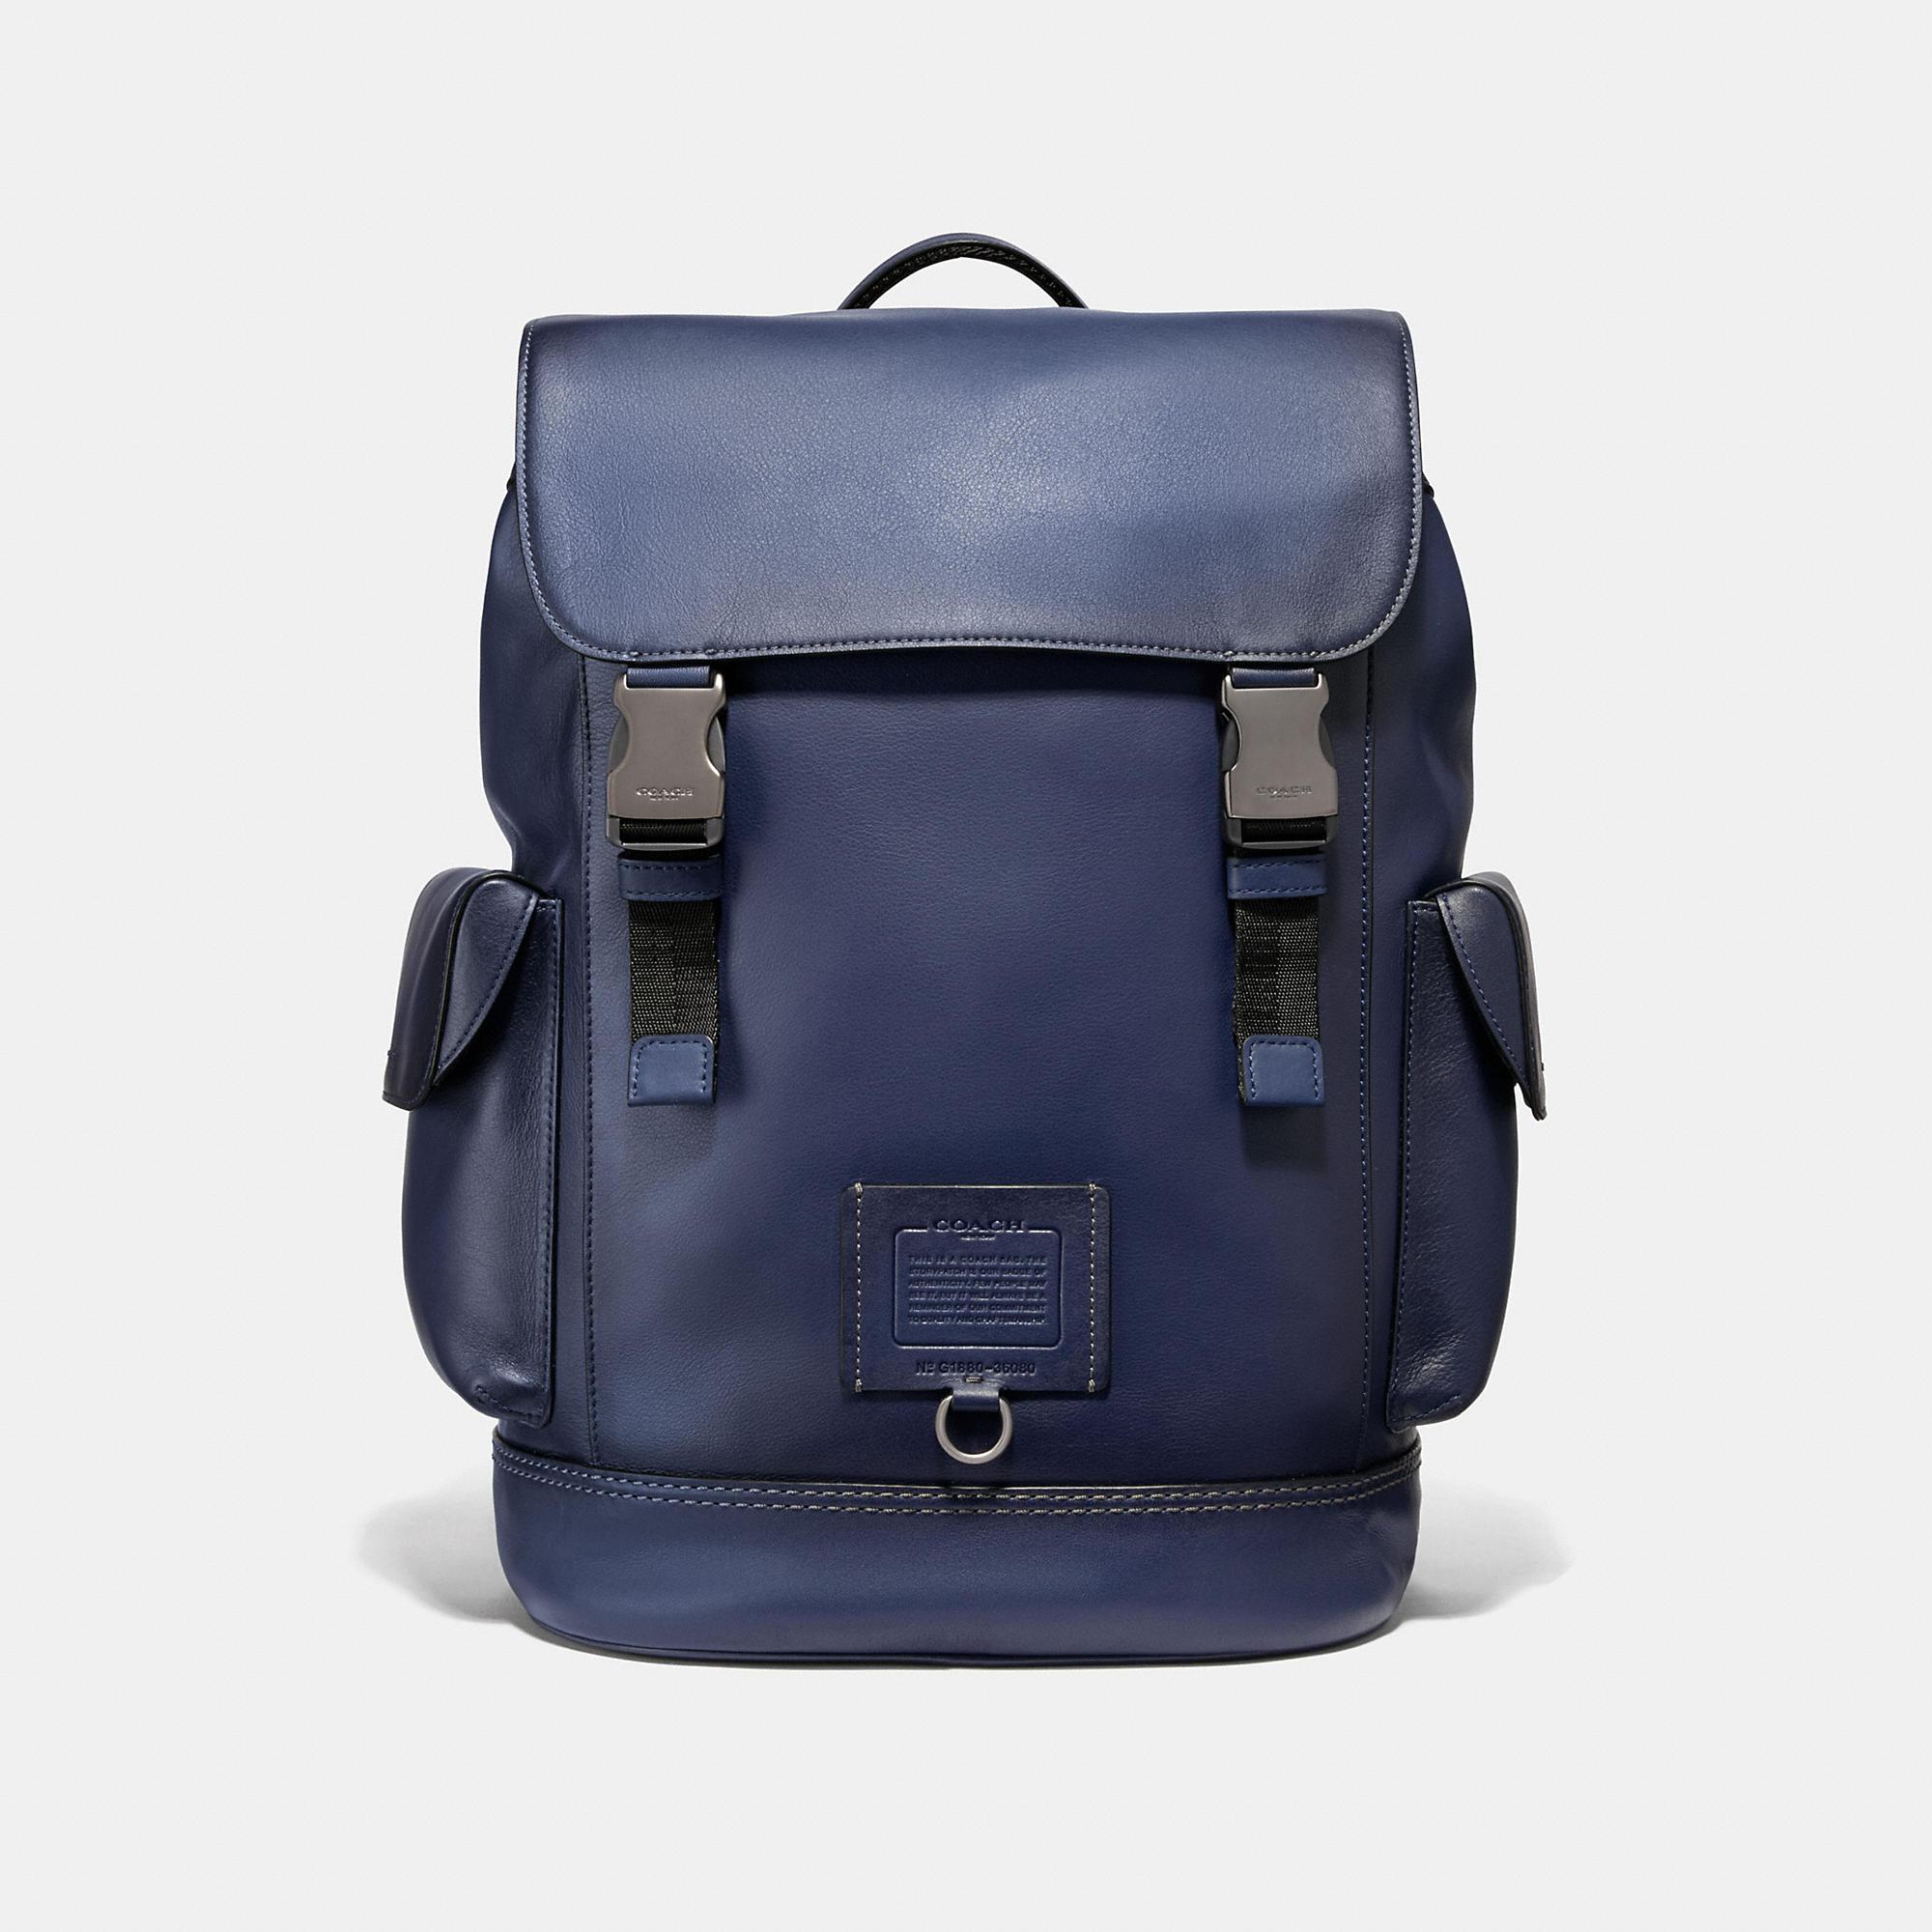 COACH Leather Rivington Backpack in Blue for Men - Lyst